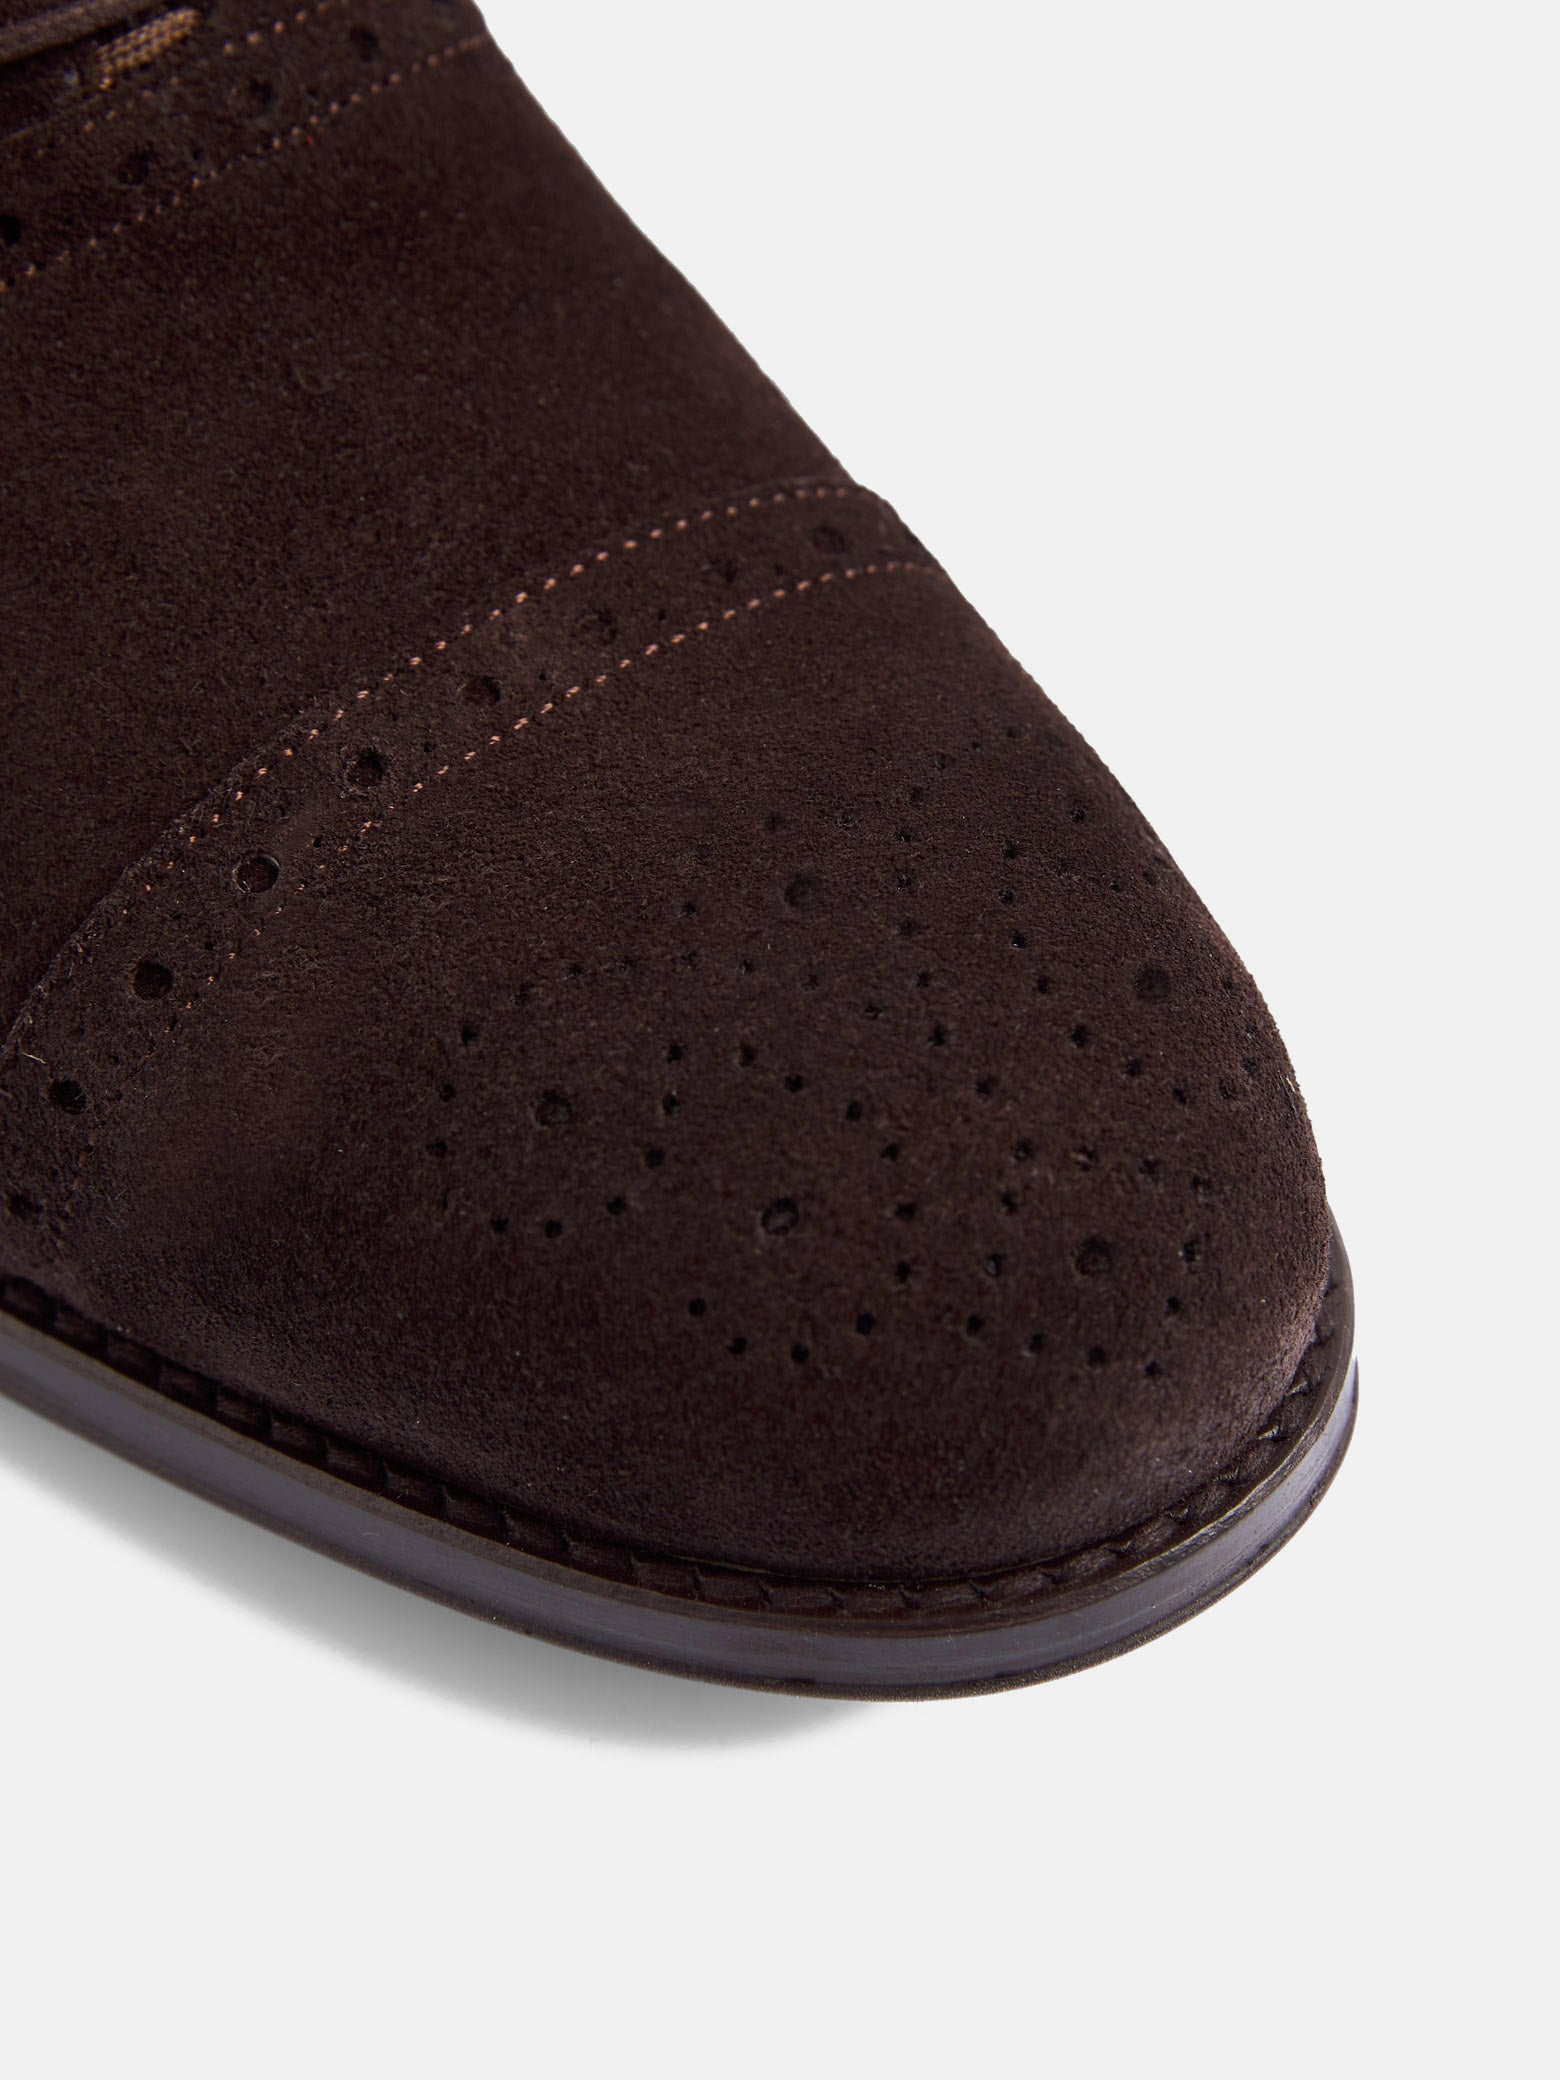 Classic brown perforated suede shoe